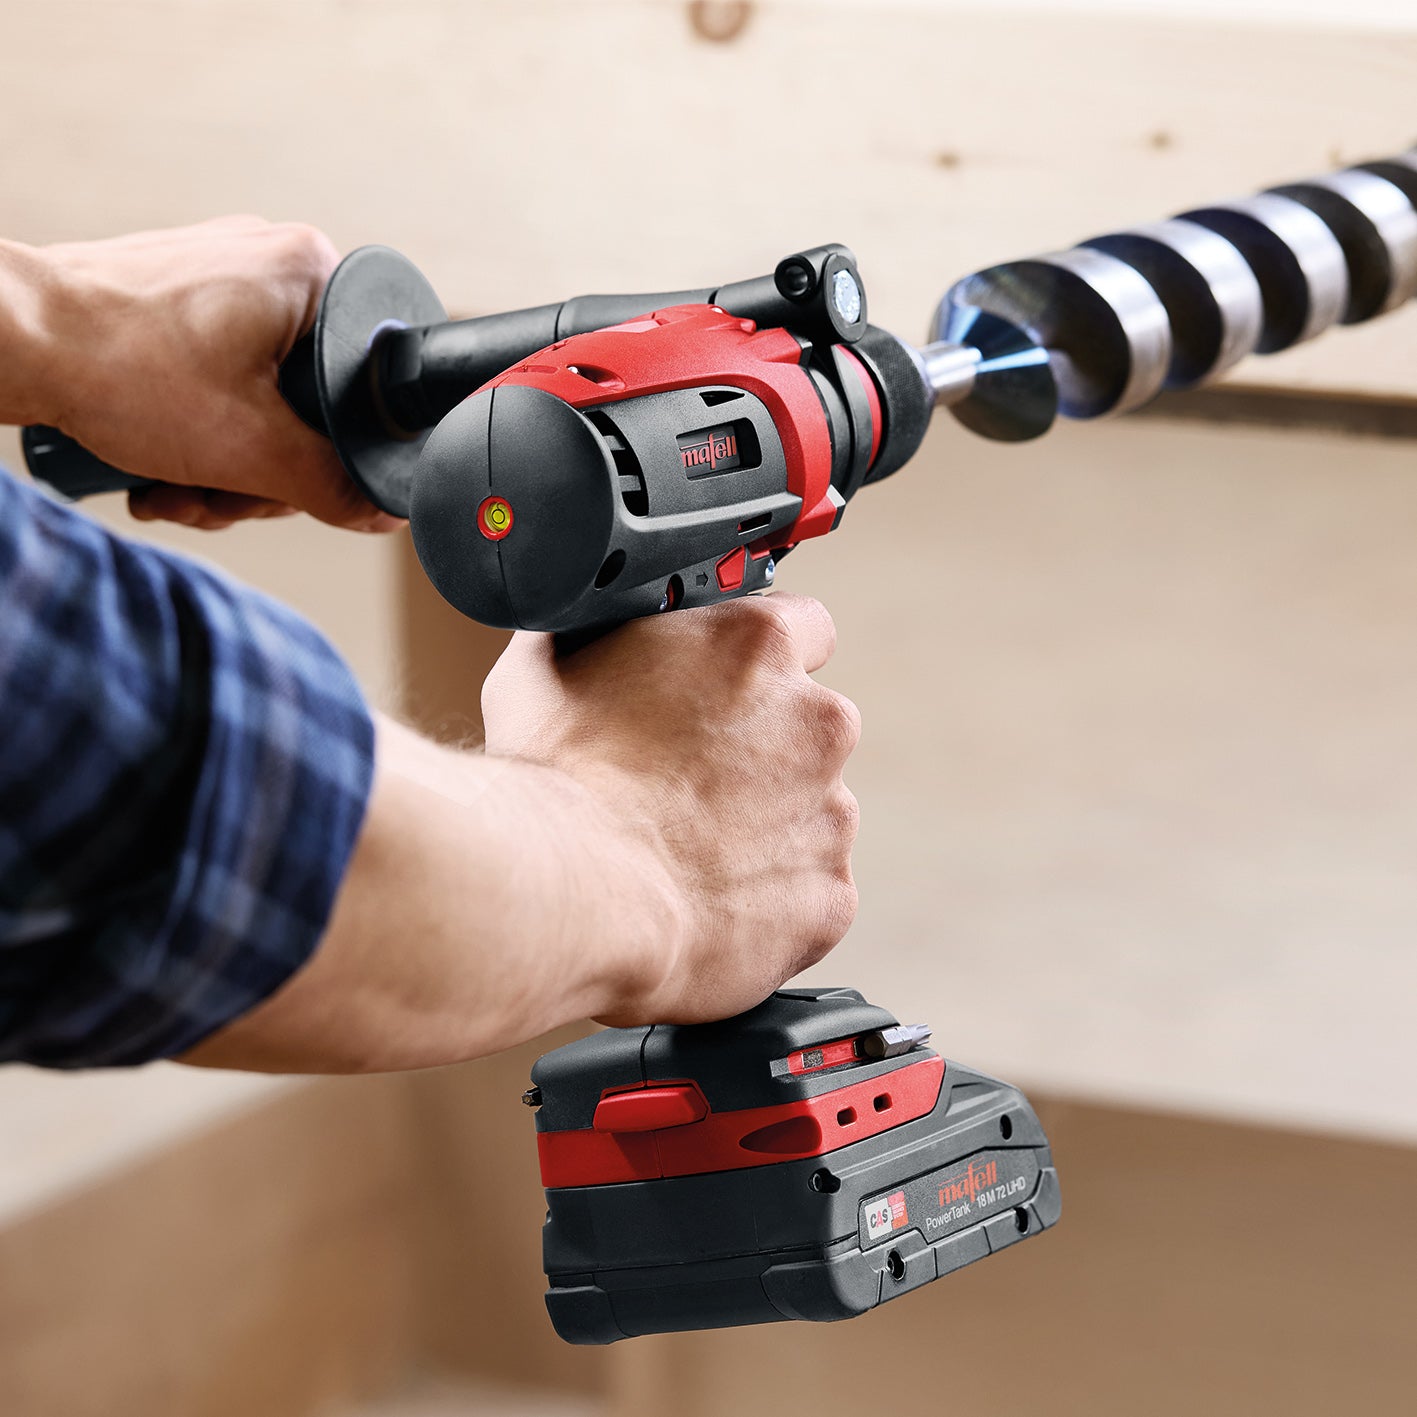 A18 MBL Pure Cordless drill driver, (Excludes Batts & Charger)